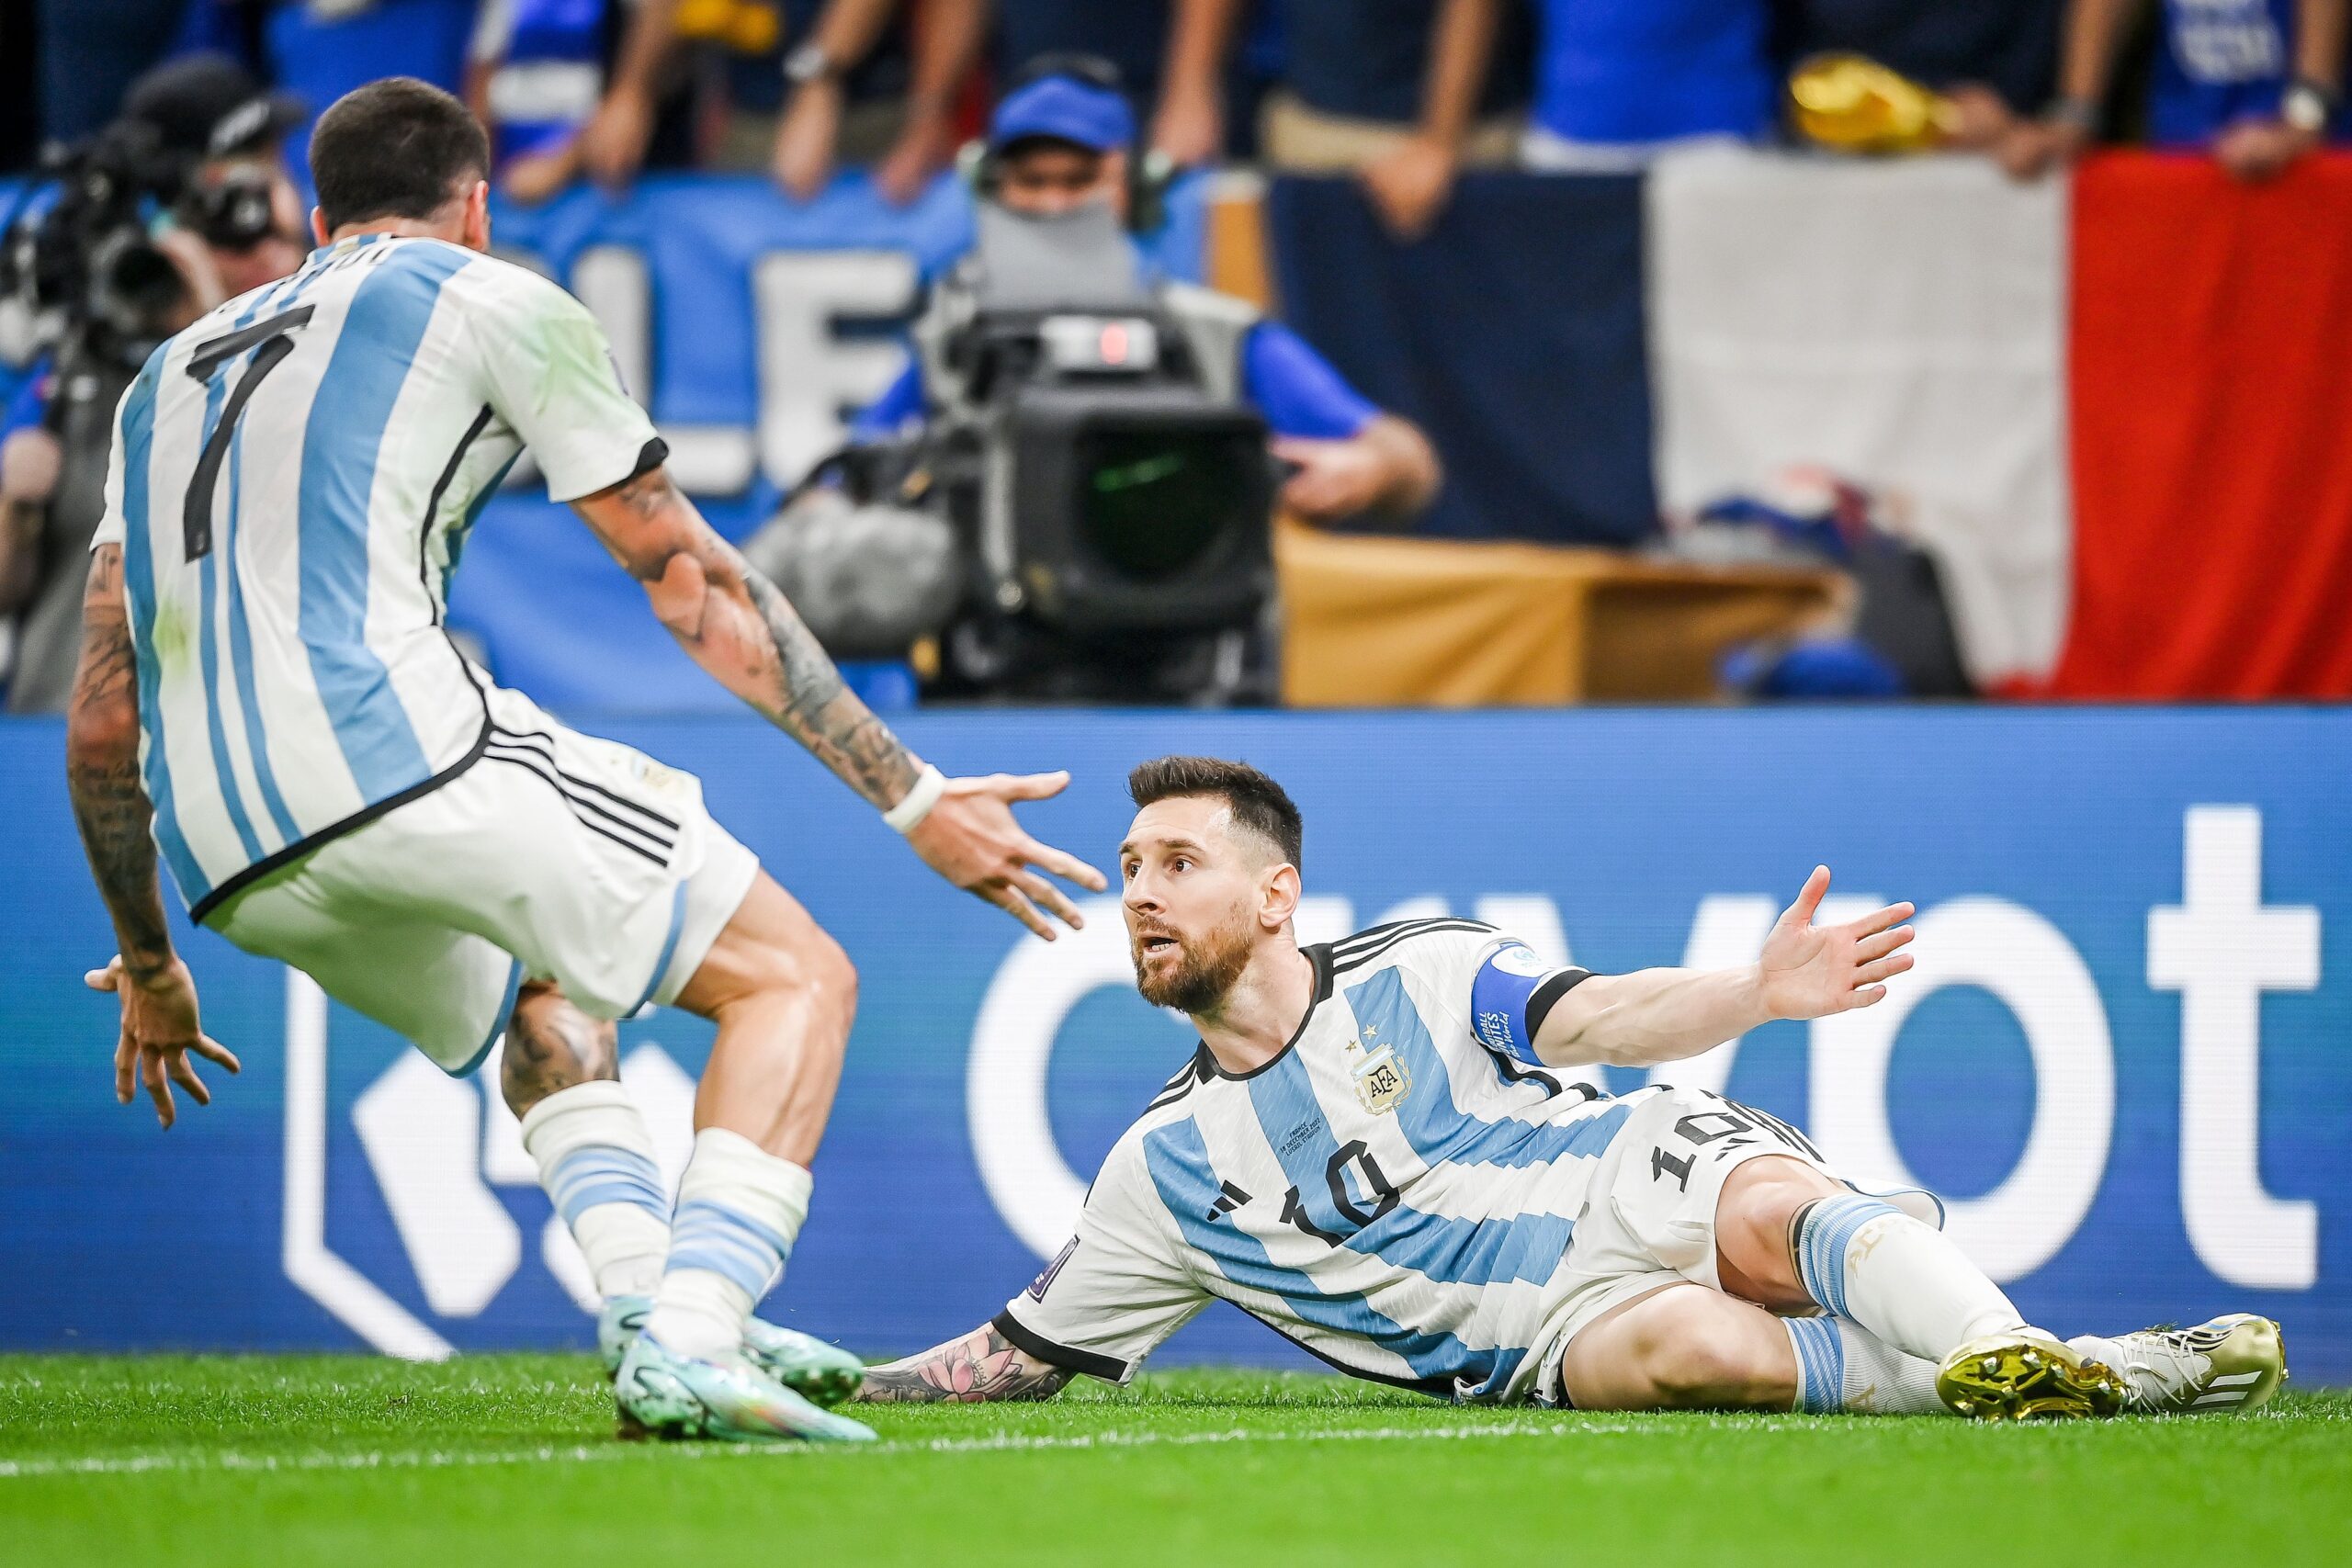 Argentina wins 4 - 2 on penalties against France